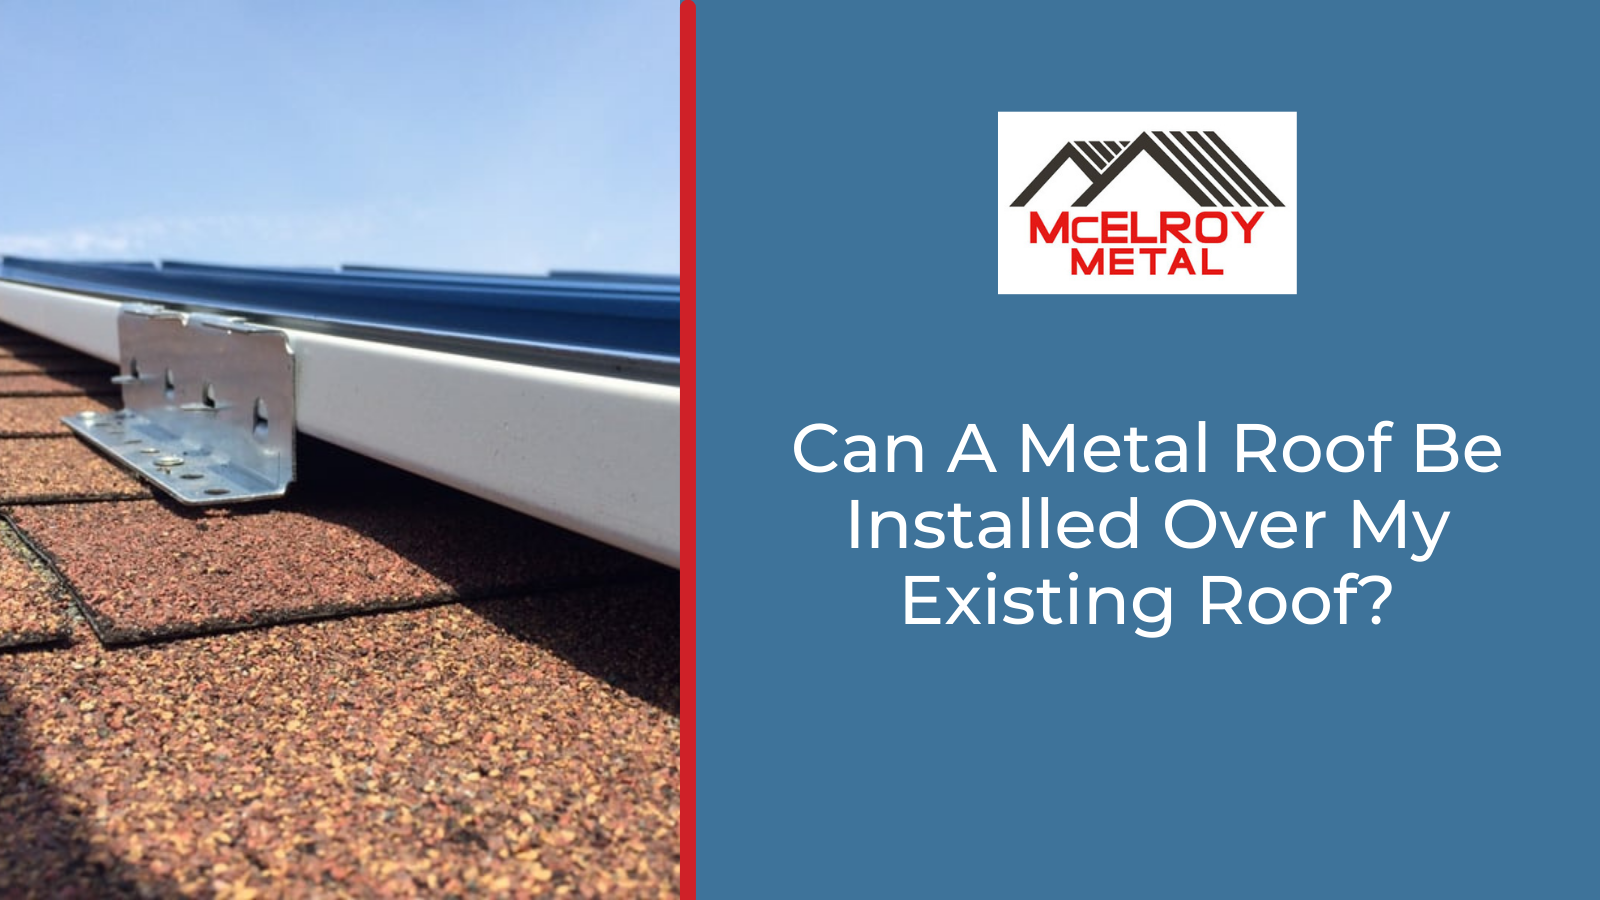 Can A Metal Roof Be Installed Over My Existing Roof?